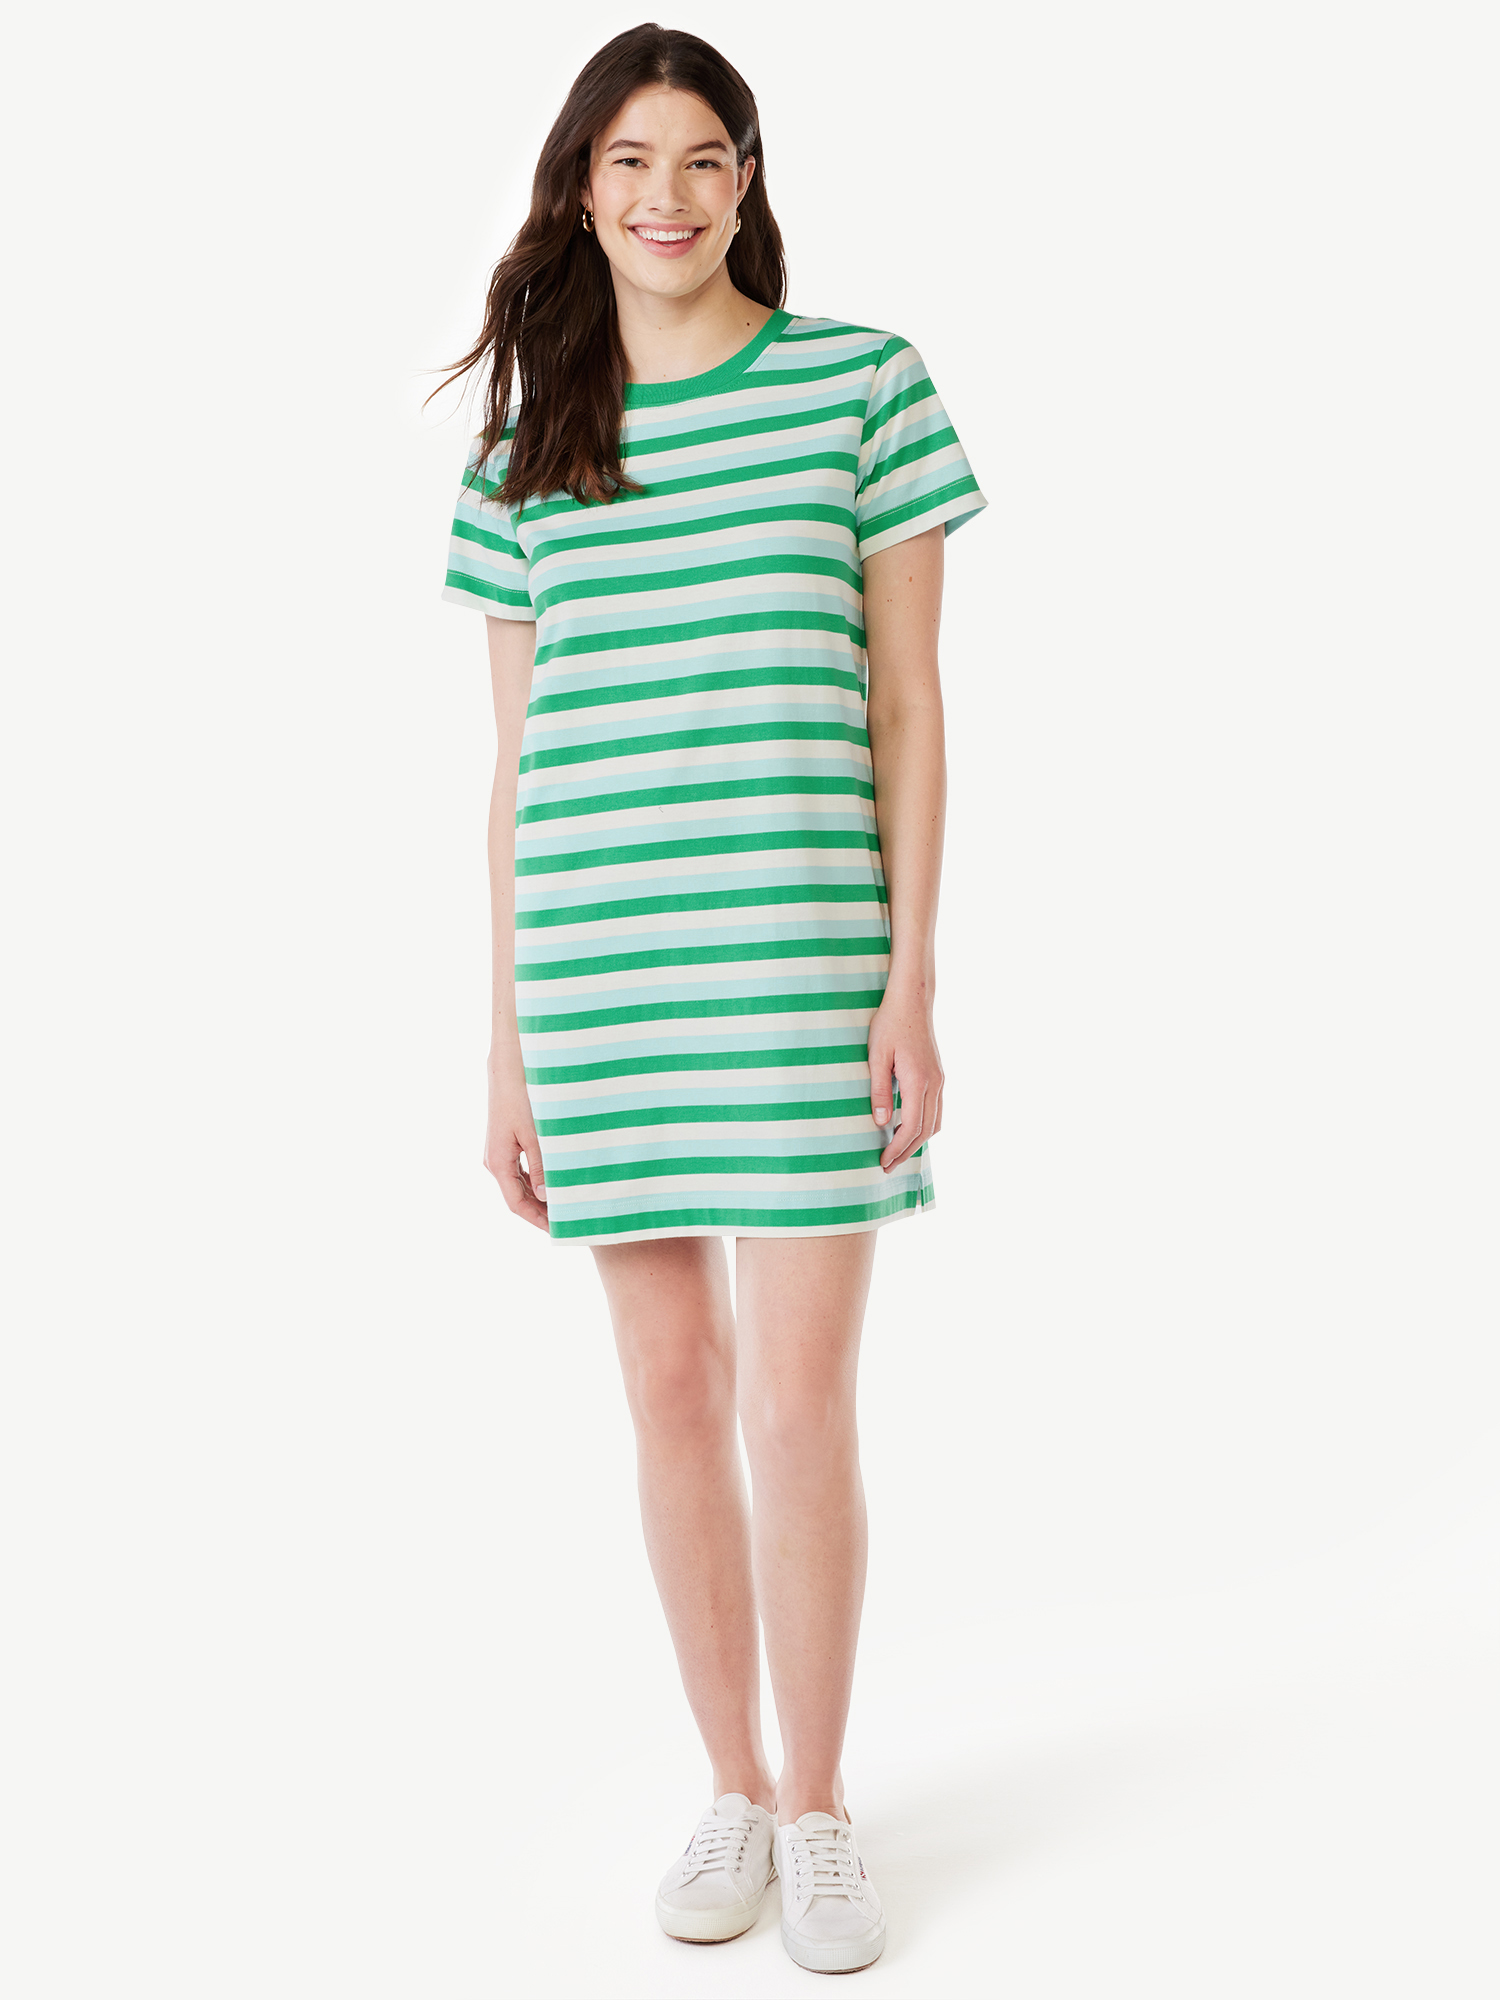 Free Assembly Women's Mini T-Shirt Dress with Short Sleeves, Sizes XS-XXXL - image 4 of 6